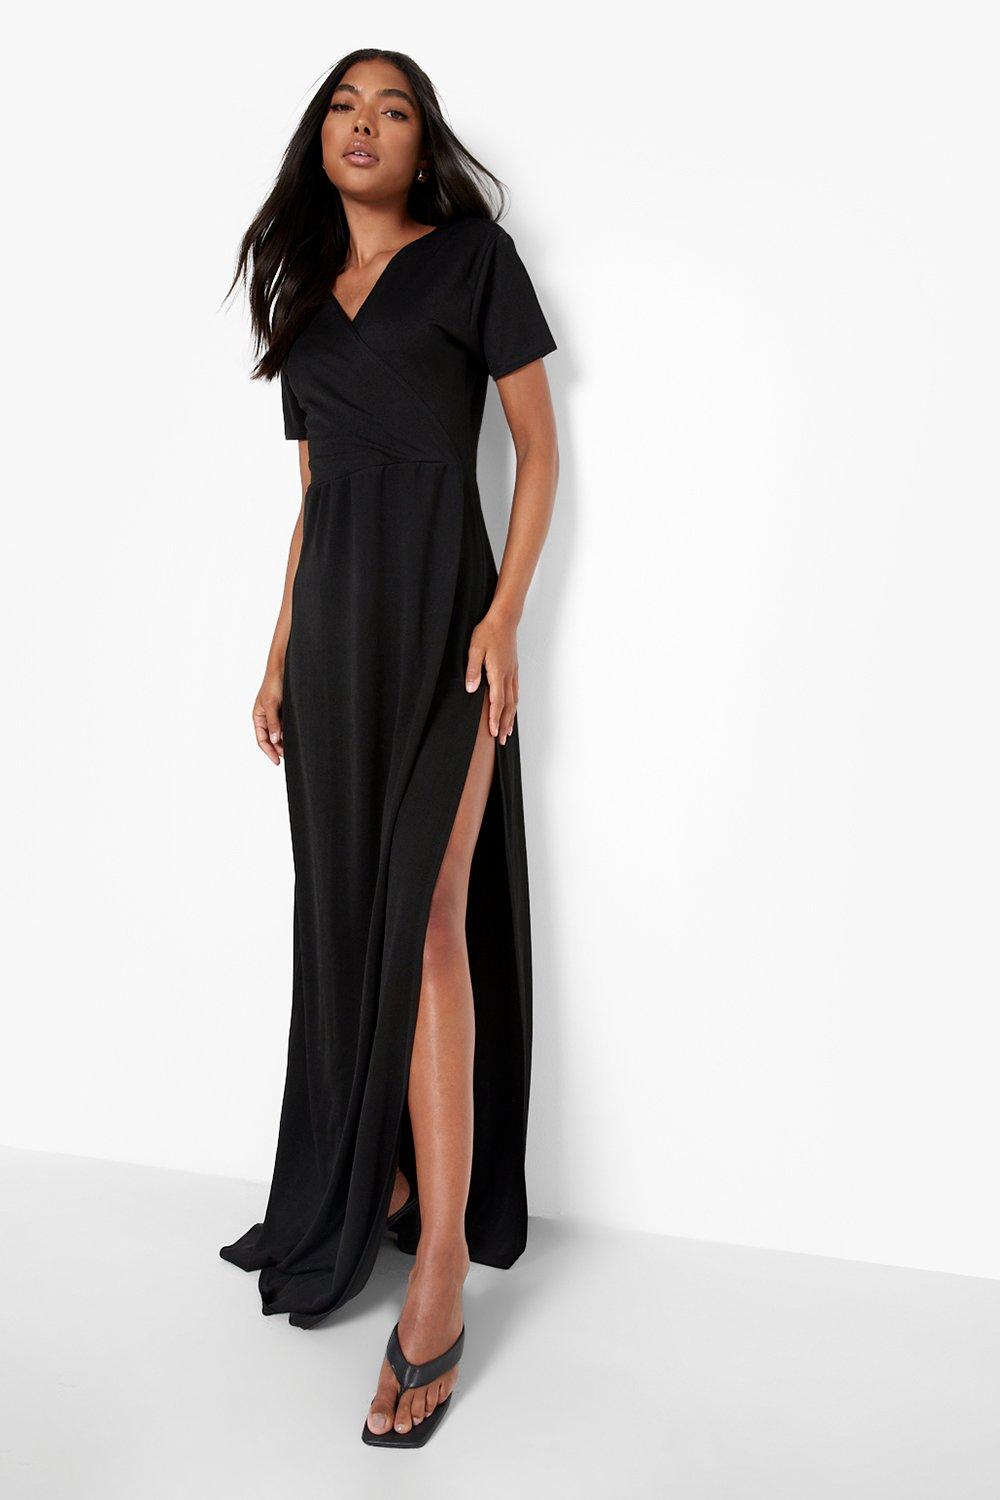 Black Dresses For Funeral | Funeral ...